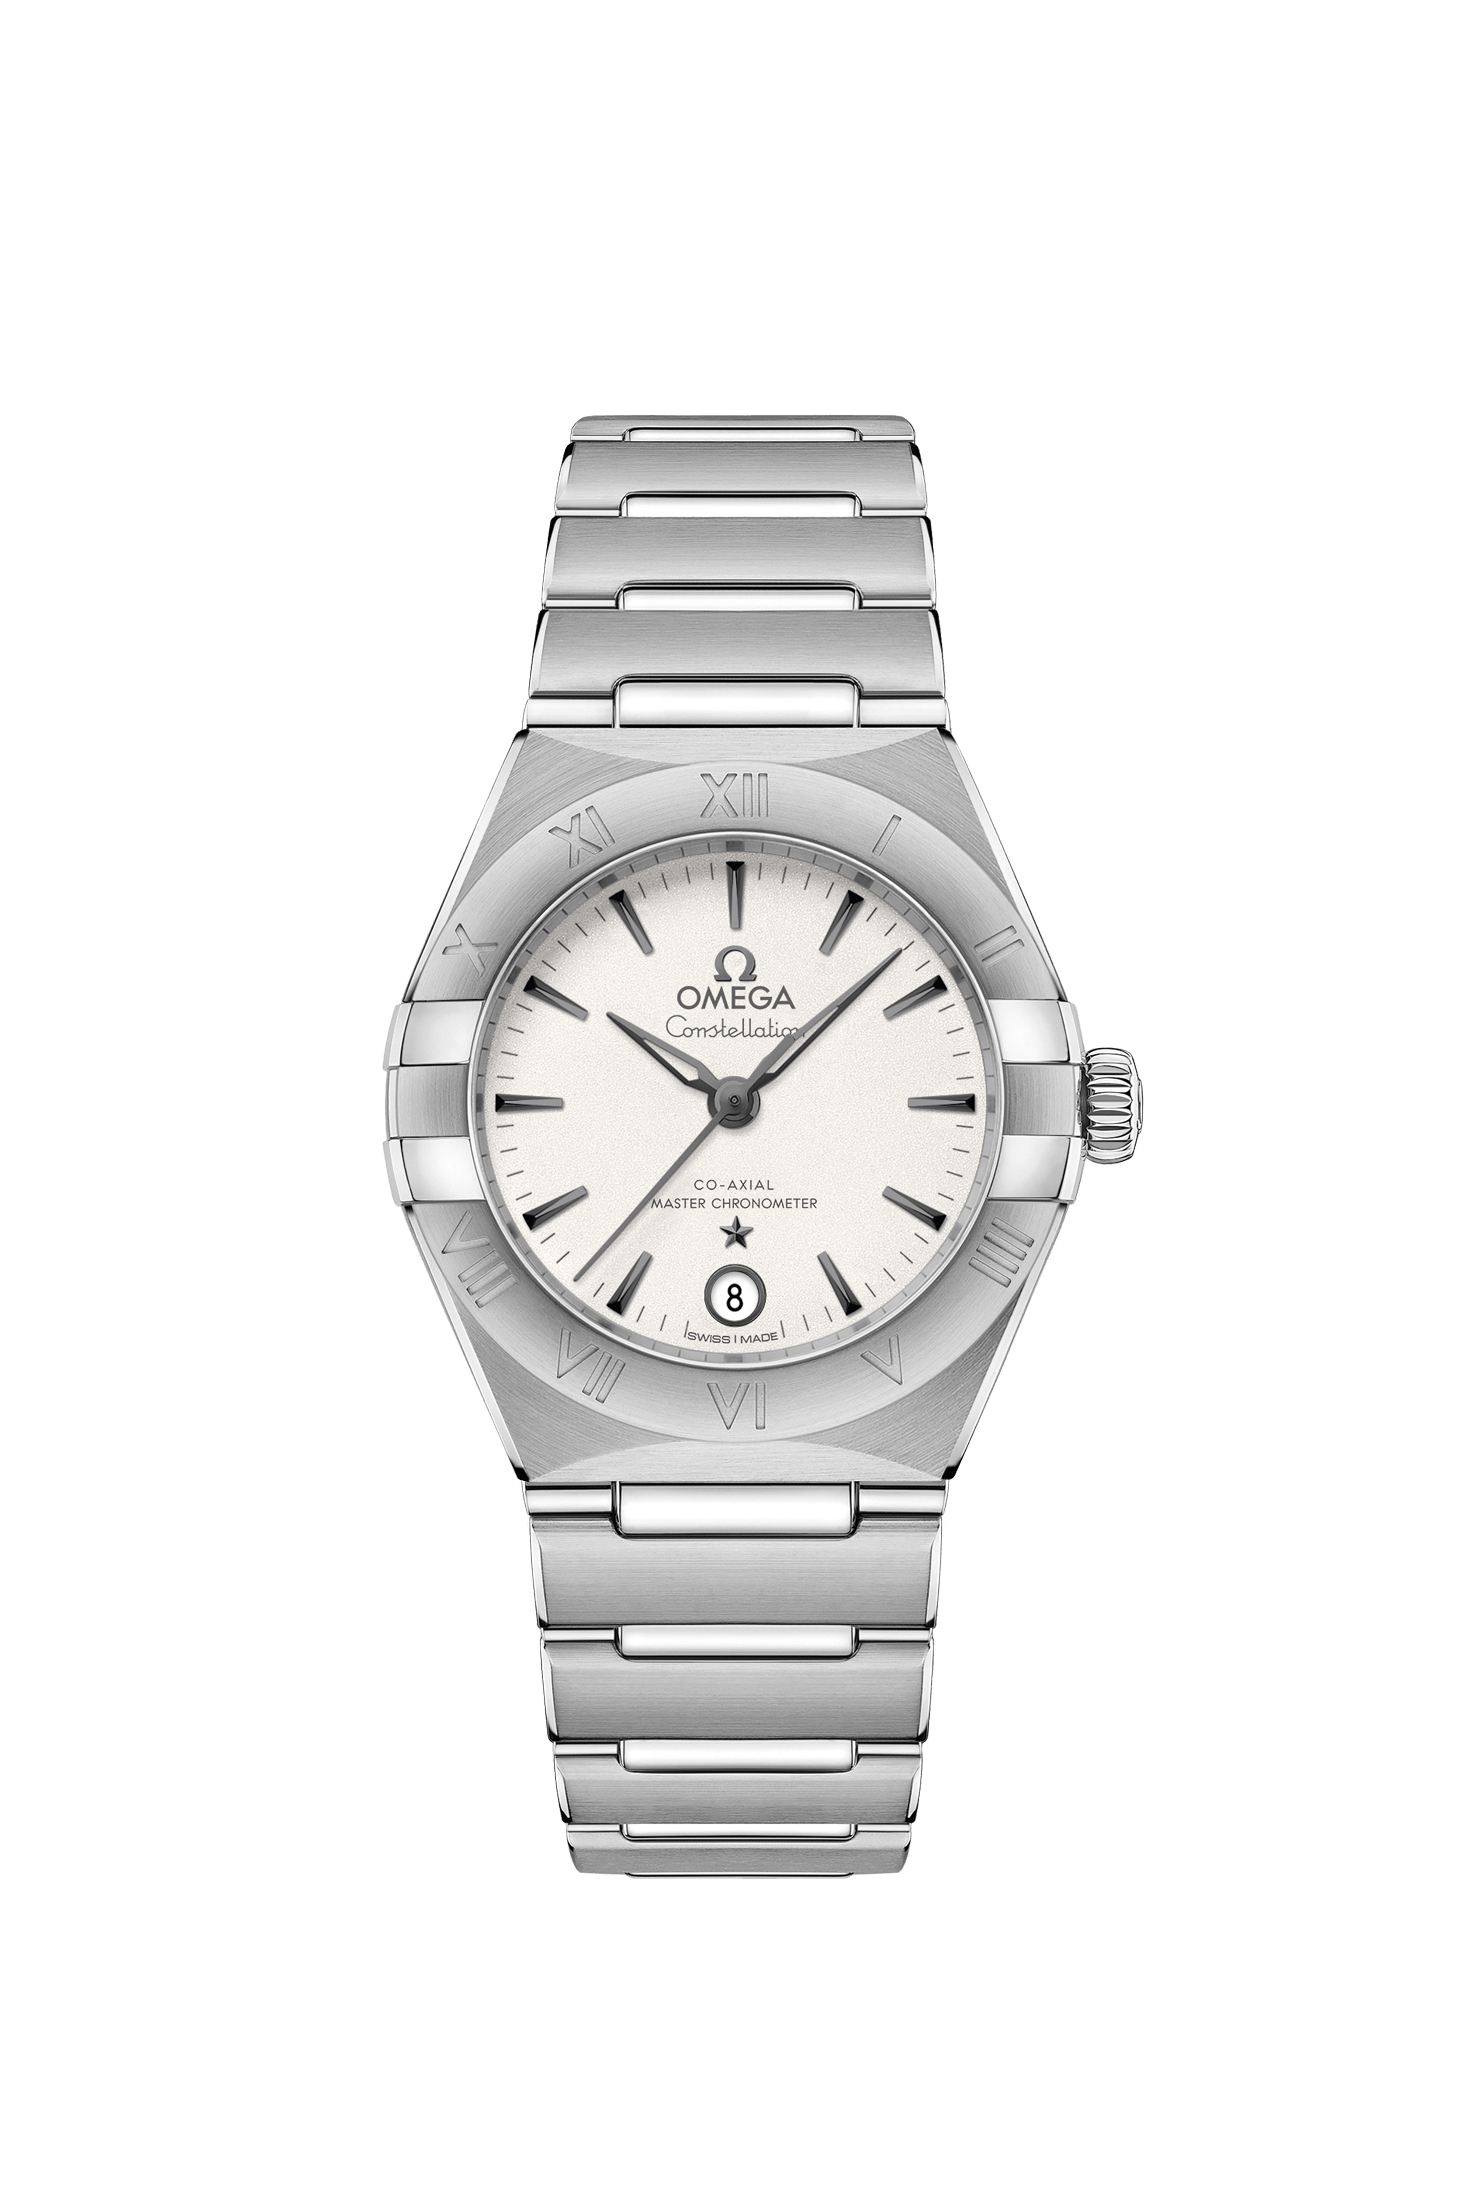 Ladies' watch  OMEGA, Constellation Co Axial Master Chronometer / 29mm, SKU: 131.10.29.20.02.001 | watchapproach.com